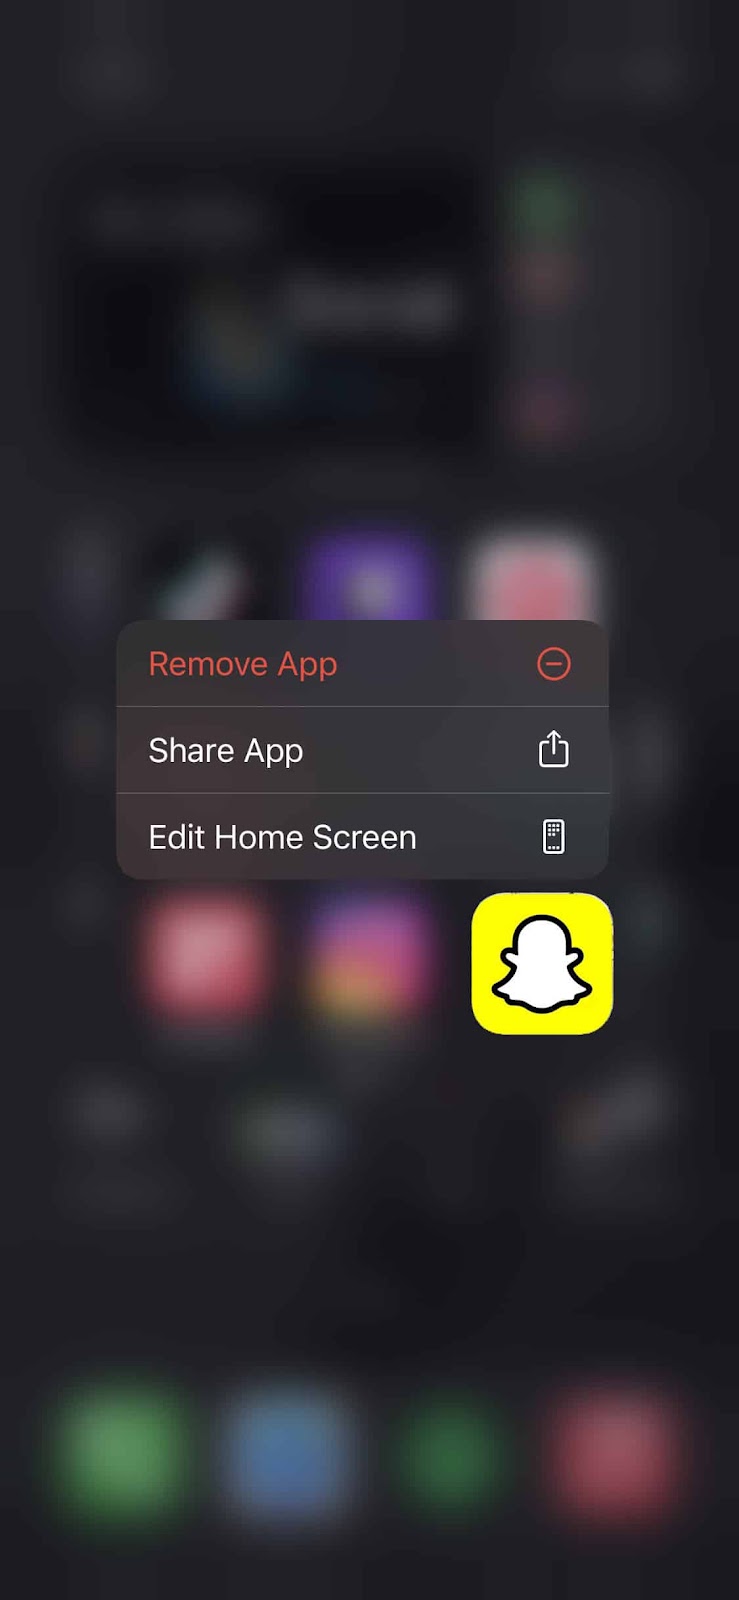 login issues on Snapchat